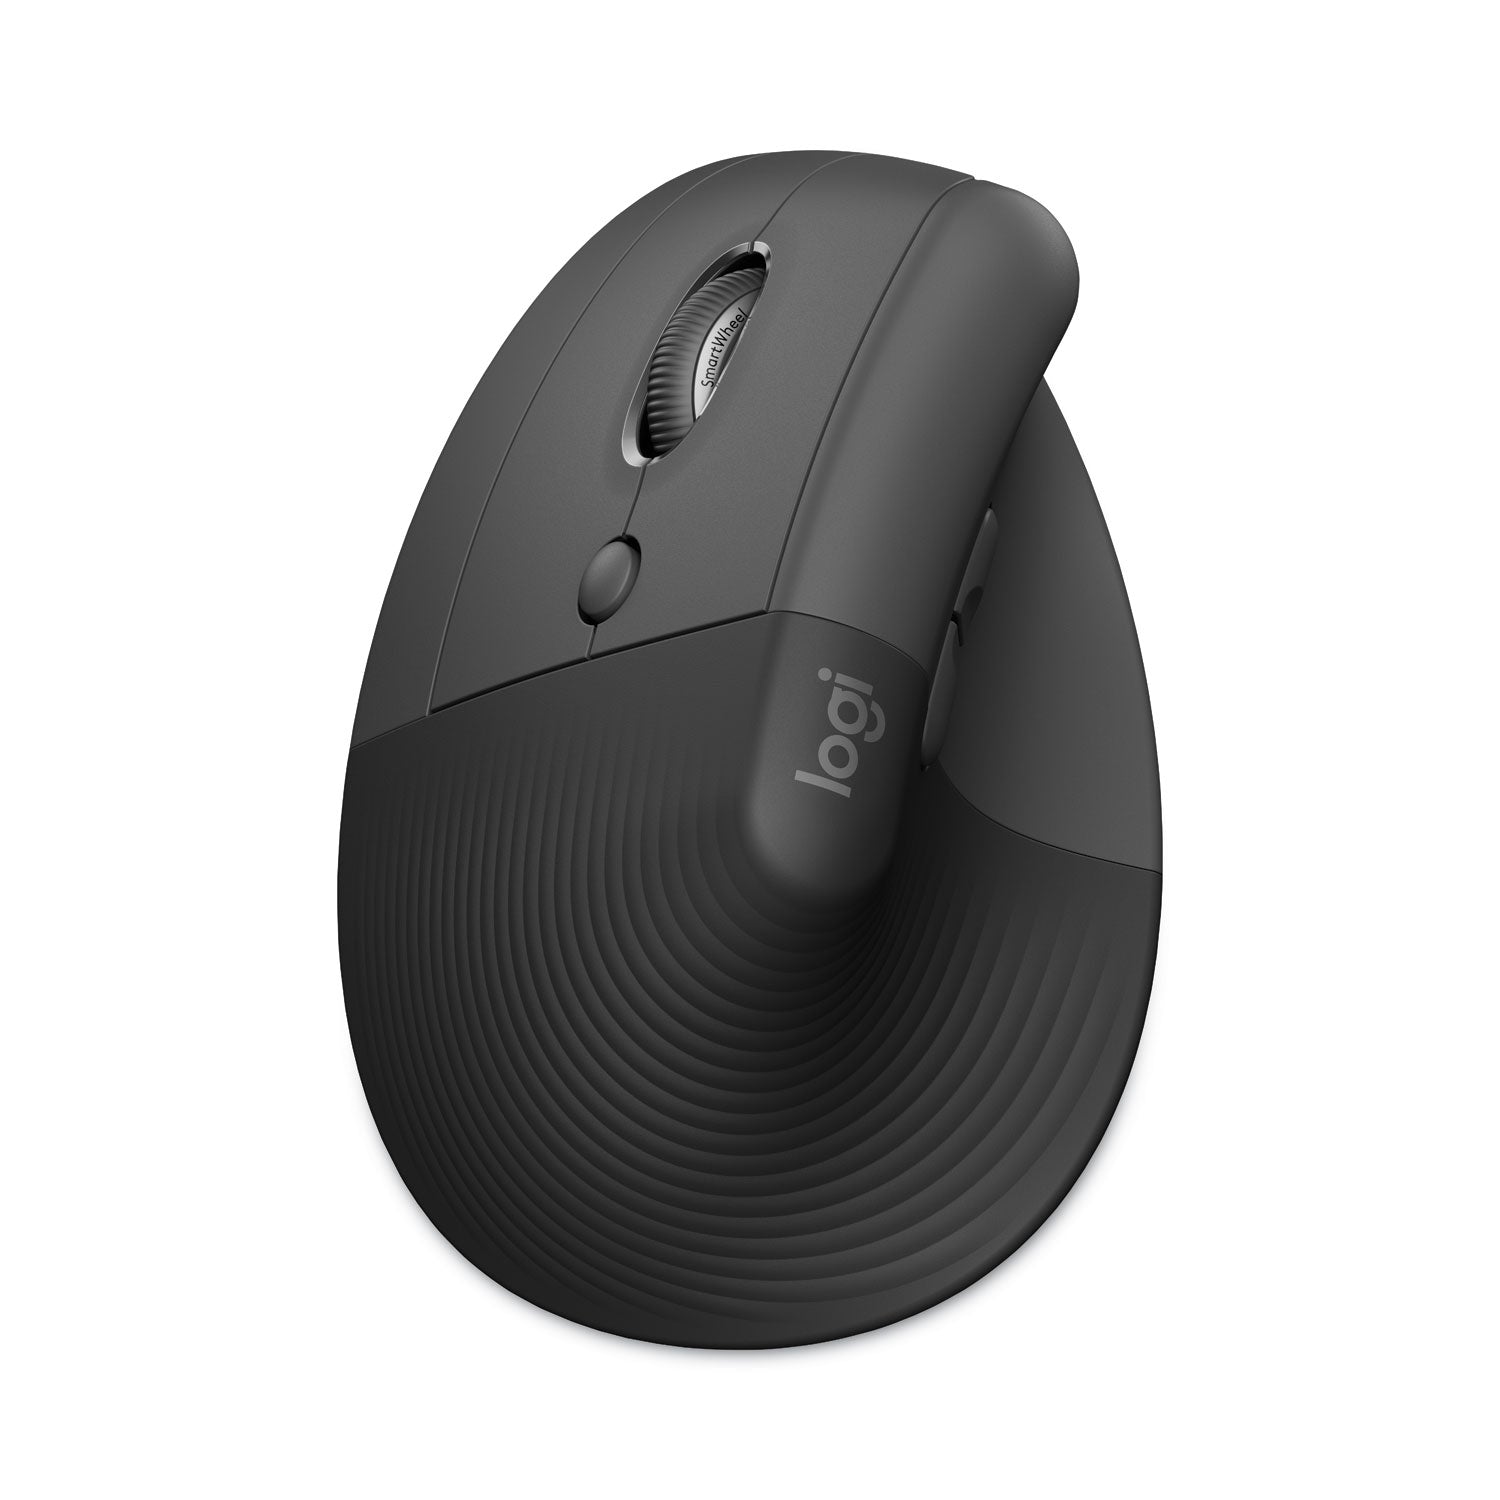 lift-vertical-ergonomic-mouse-24-ghz-frequency-32-ft-wireless-range-left-hand-use-graphite_log910006467 - 1